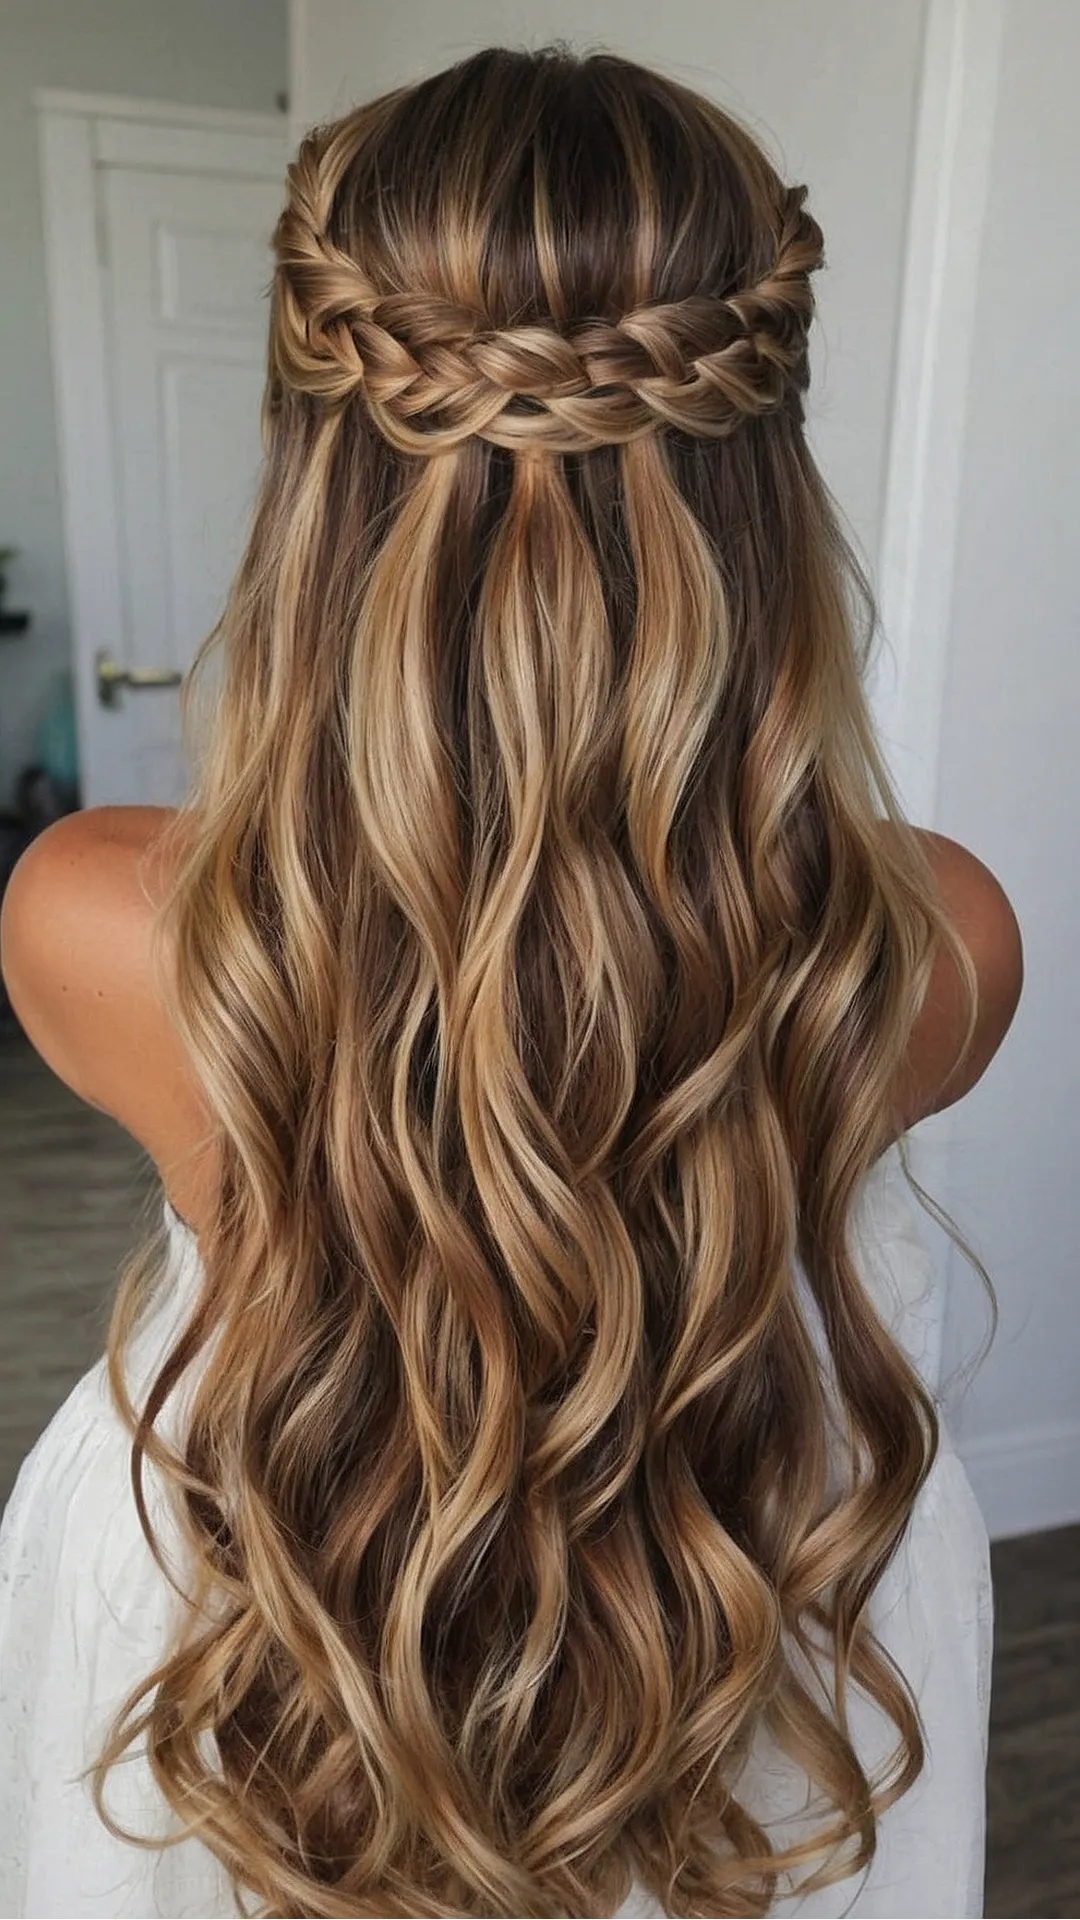 Whimsical Prom Hairstyles